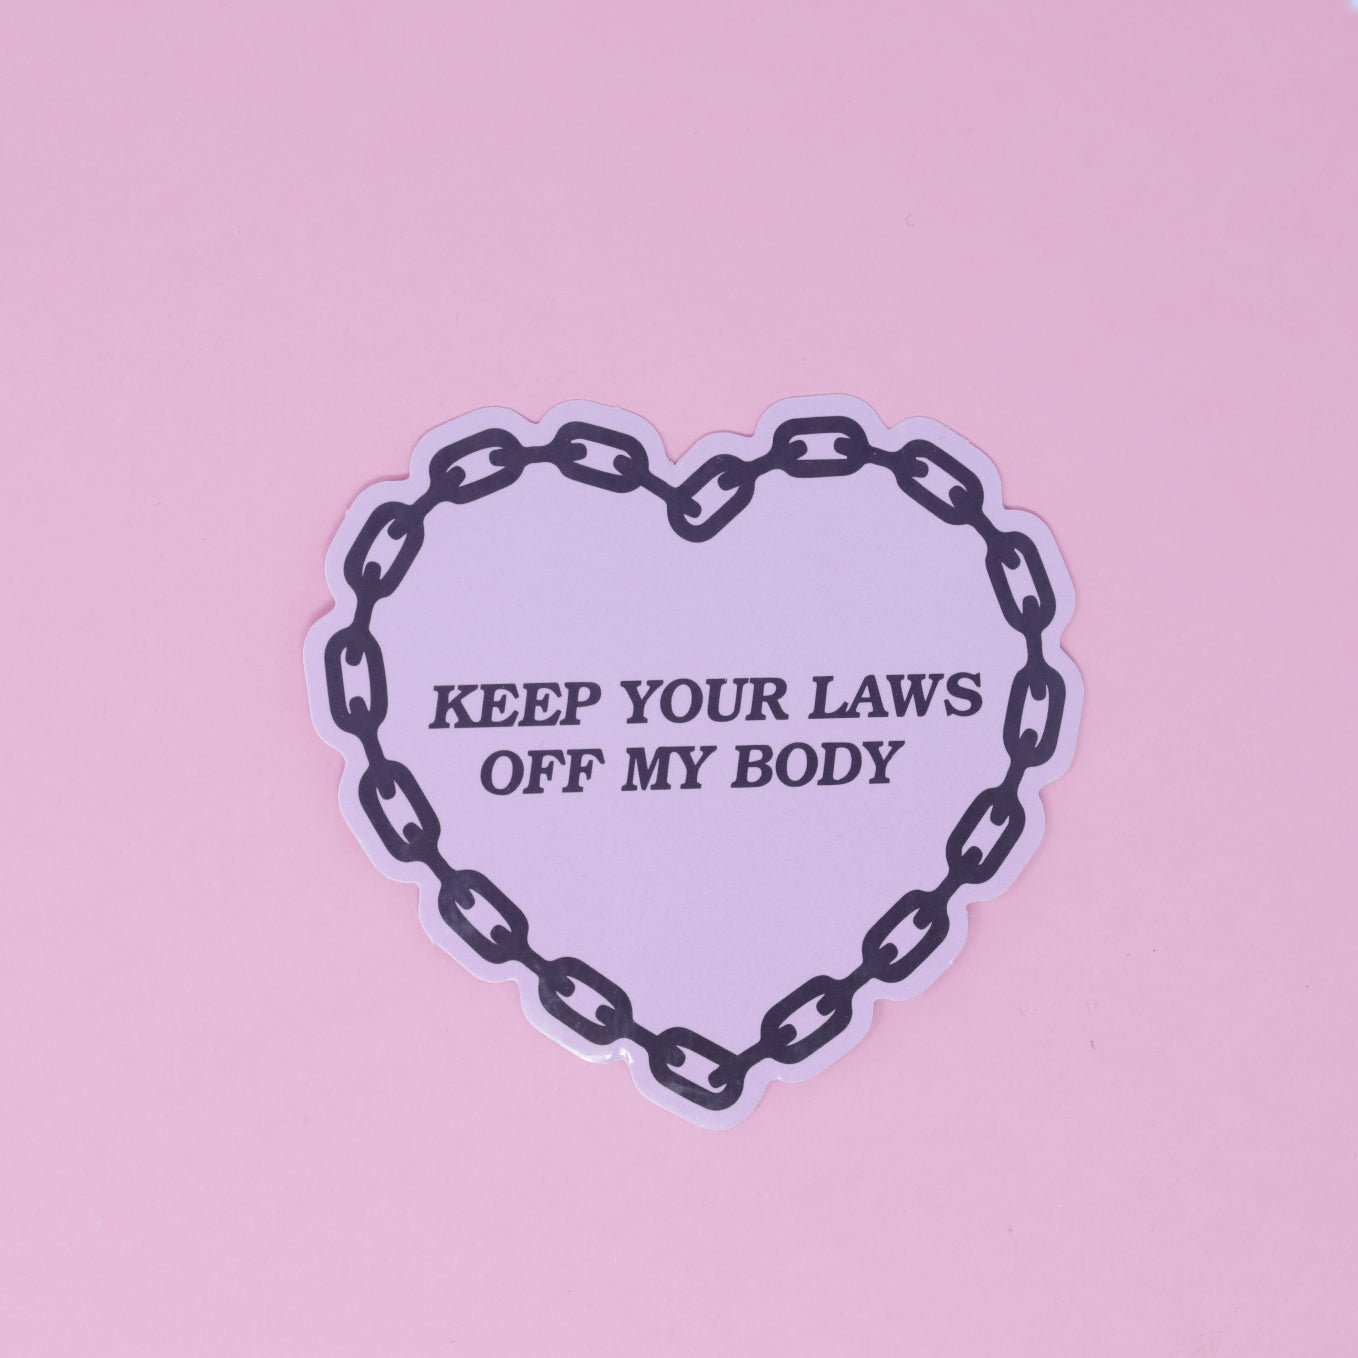 Keep Your Laws Off Heart Shaped Pink Sticker | Vinyl Coated Sticker